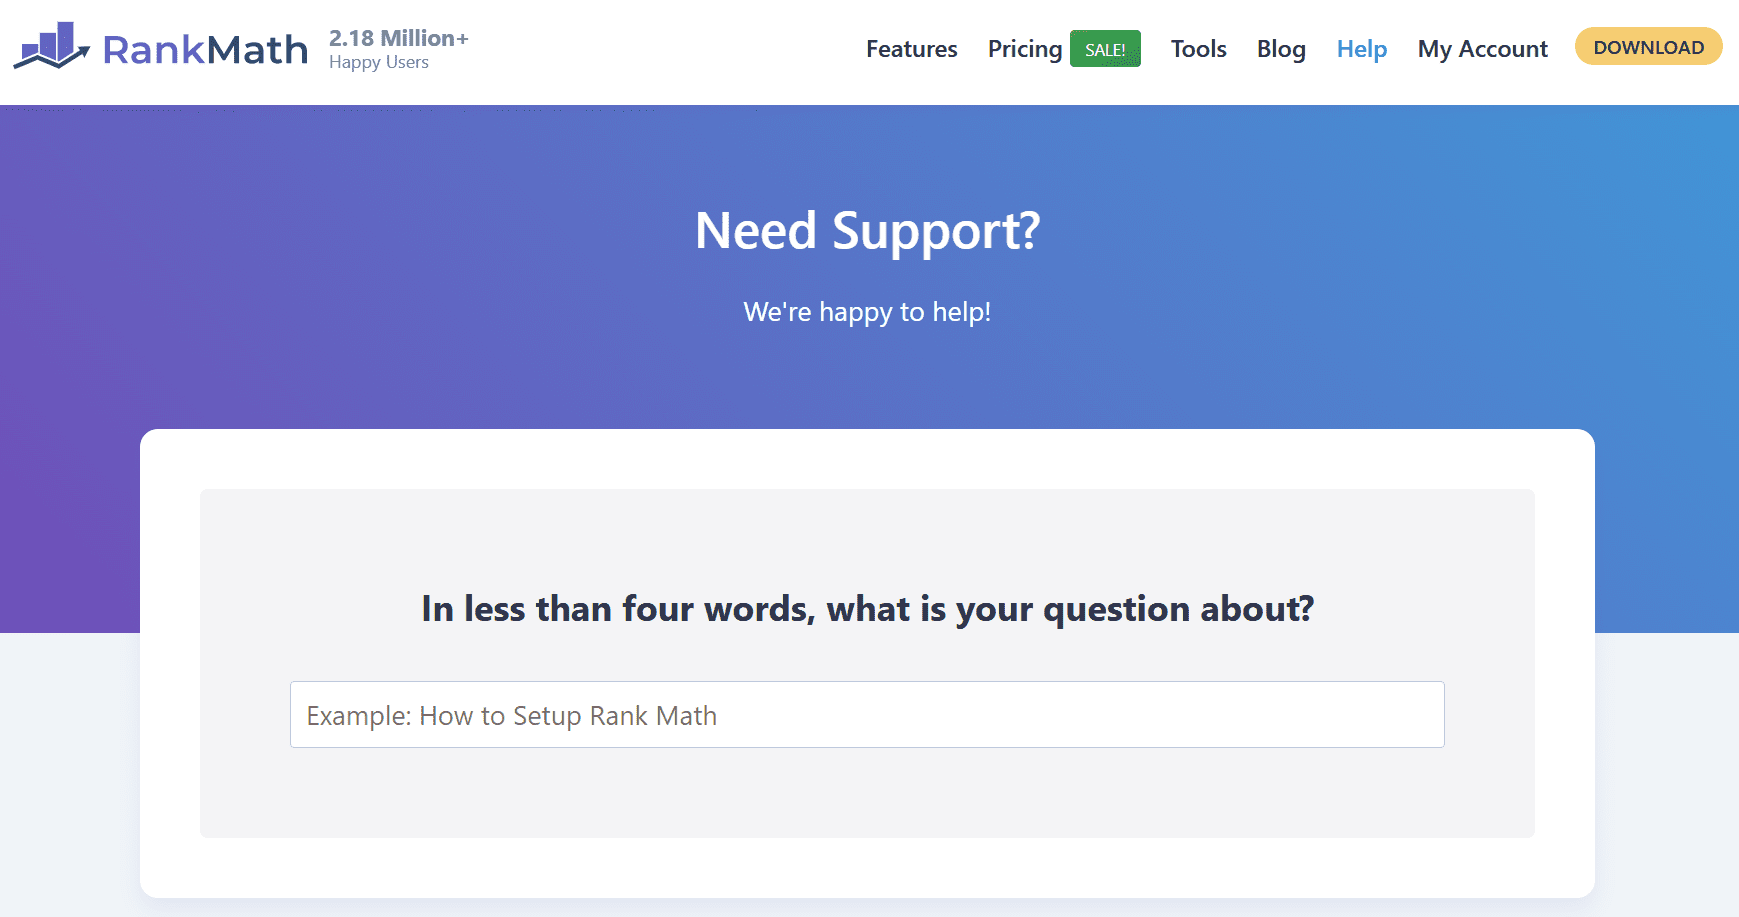 Open a ticket on our Support forum